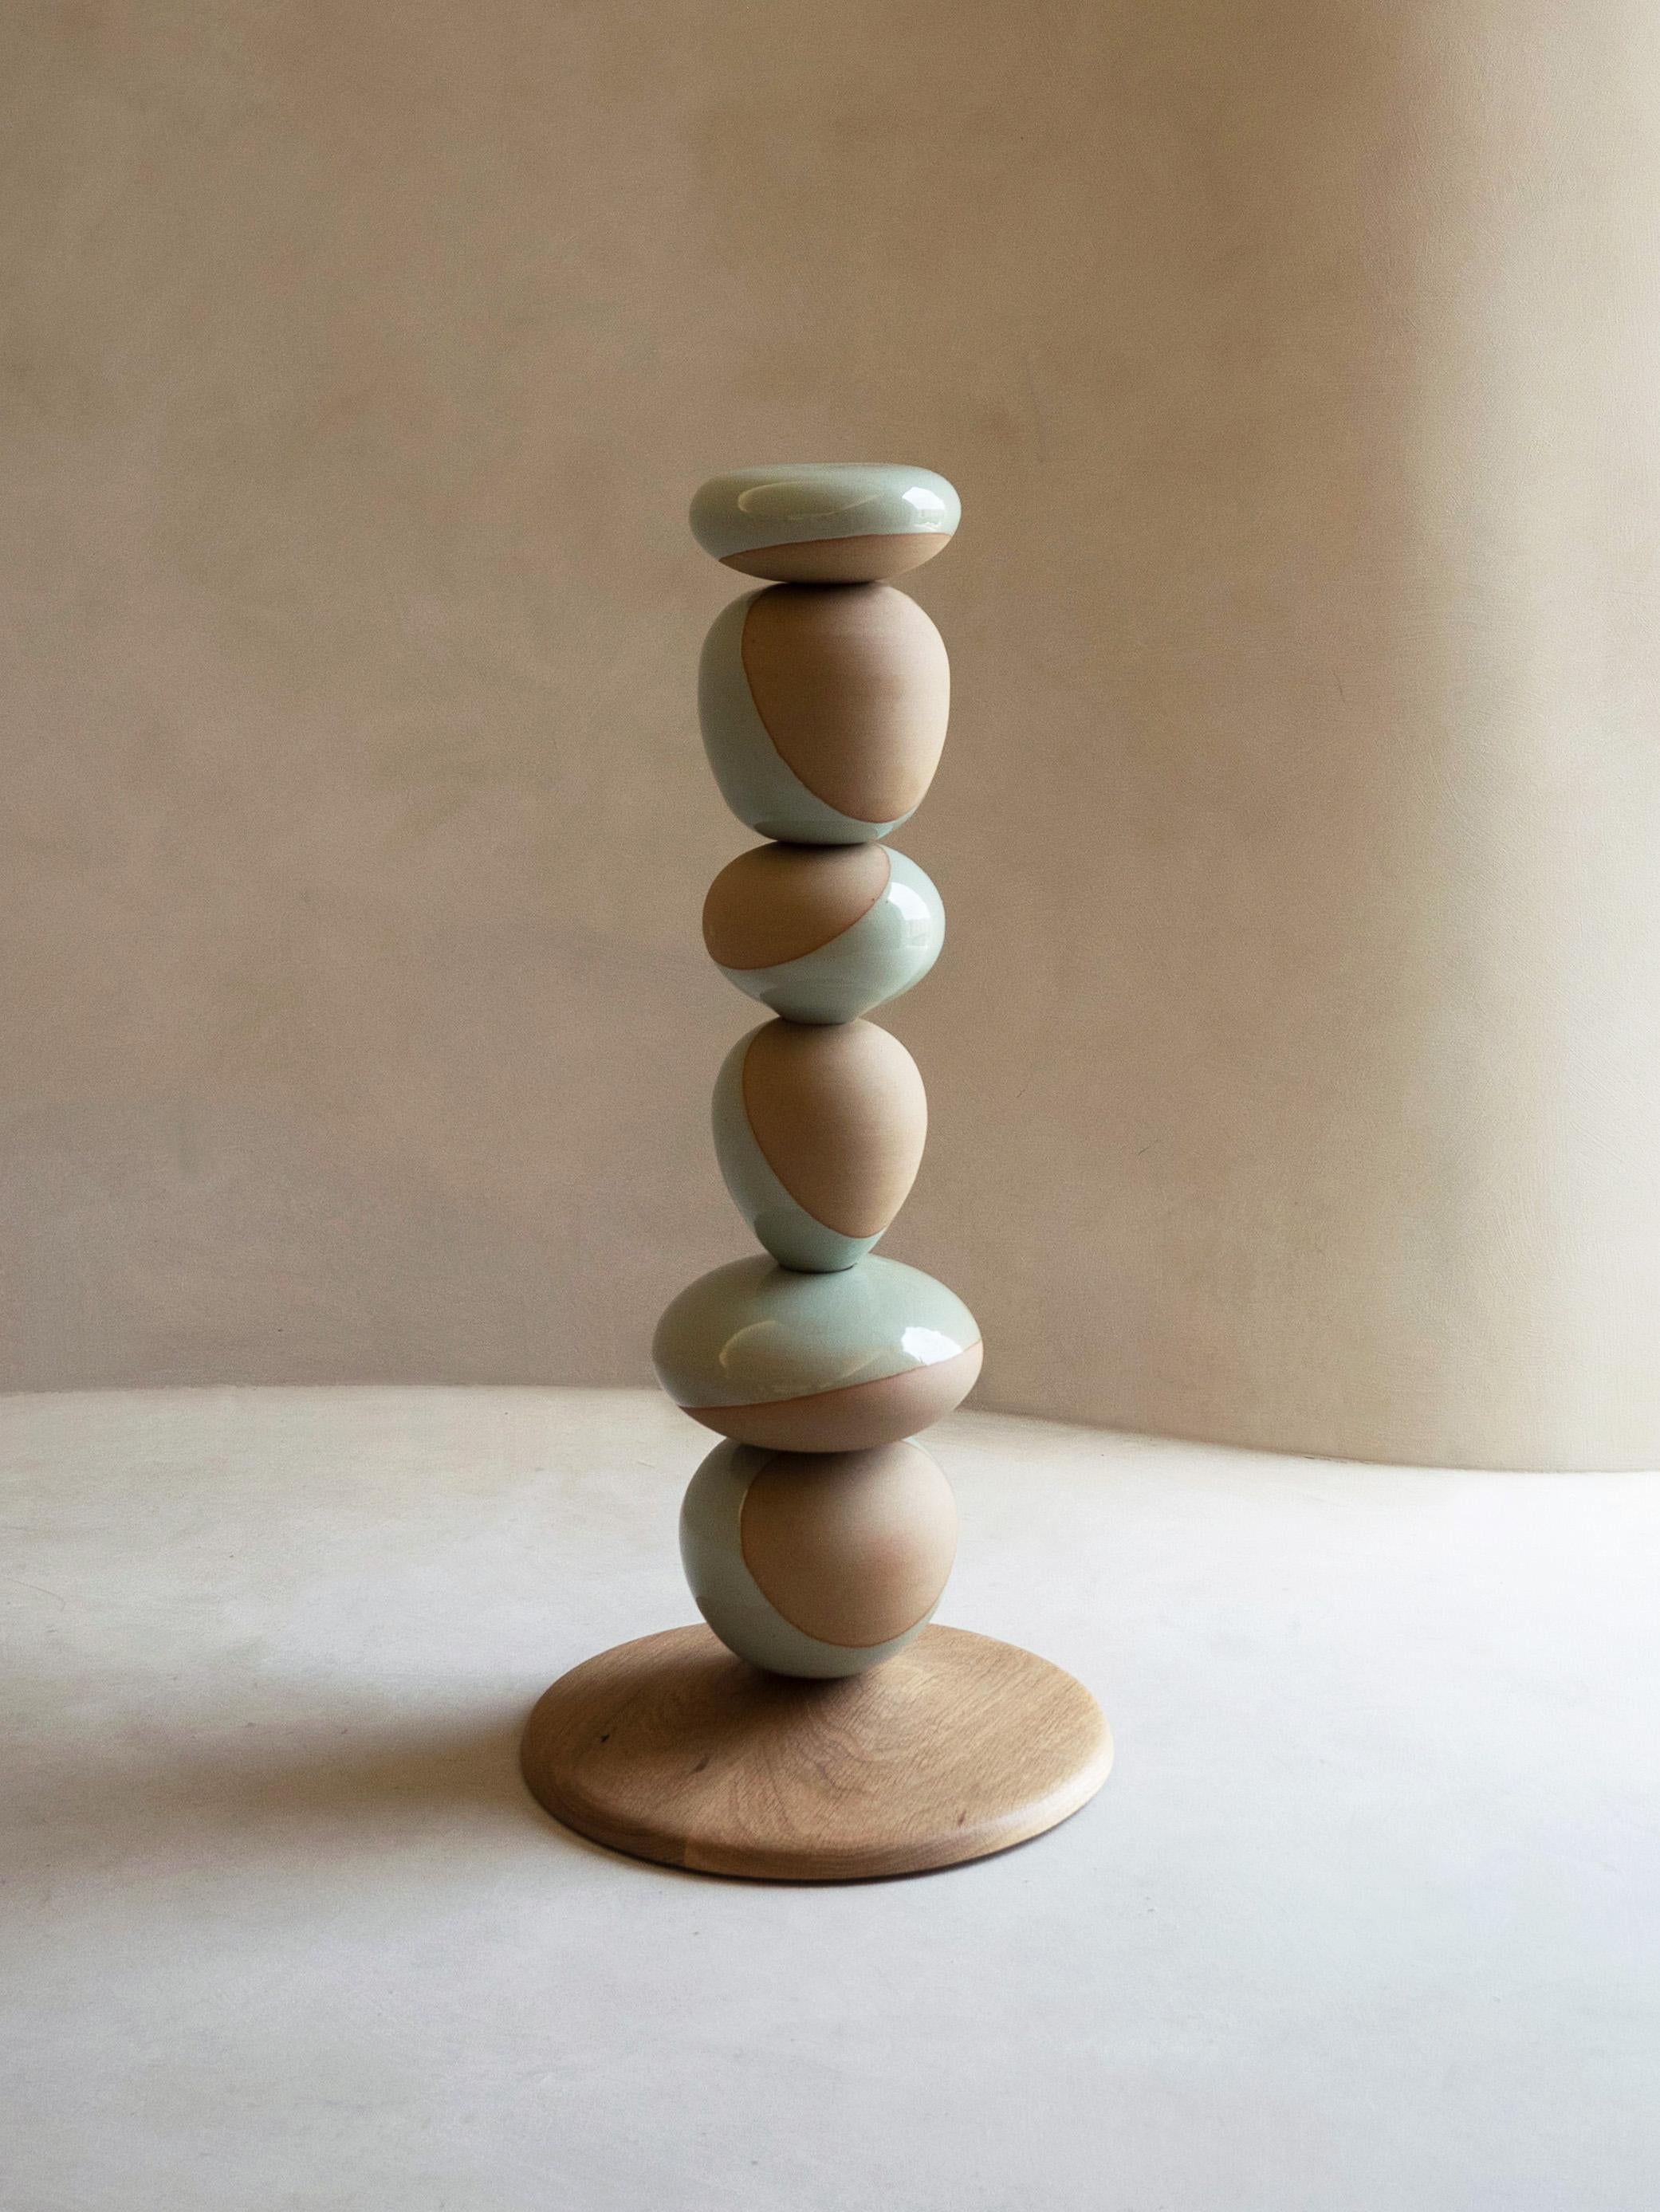 Stack Vessel II by Soo Joo is a stack sculpture made in Korean Ceramic. It is a timeless form, reminiscent of a stack of perfectly balanced river stones. This is the taller of the two Stack Vessel pairs. The Stack Vessel series is created with